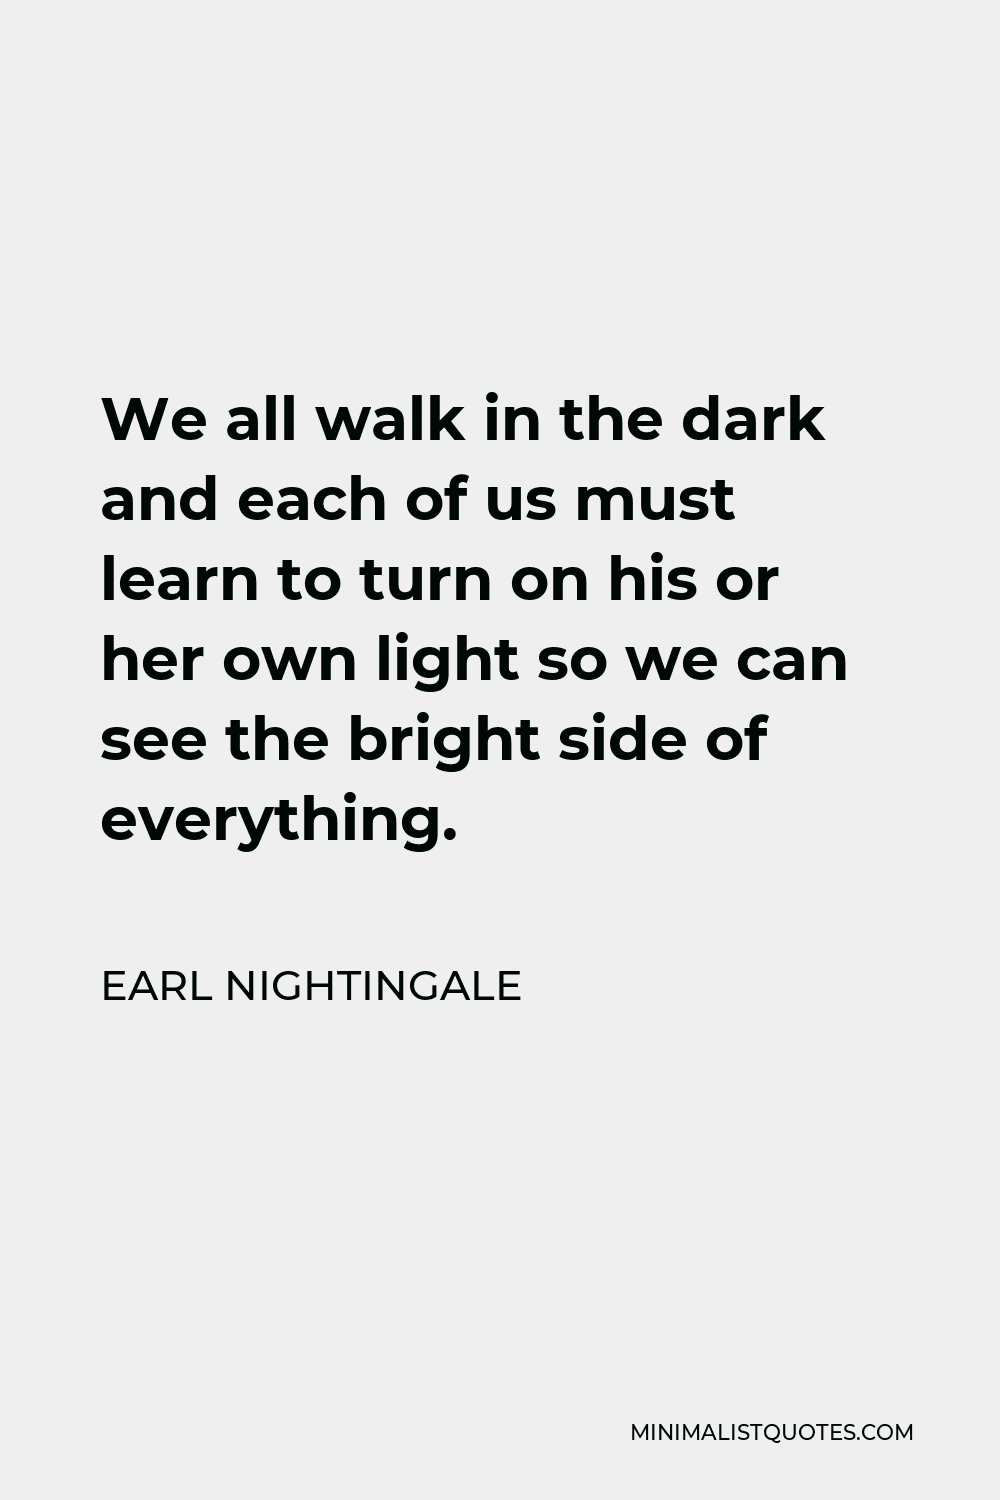 Earl Nightingale Quote - We all walk in the dark and each of us must learn to turn on his or her own light so we can see the bright side of everything.